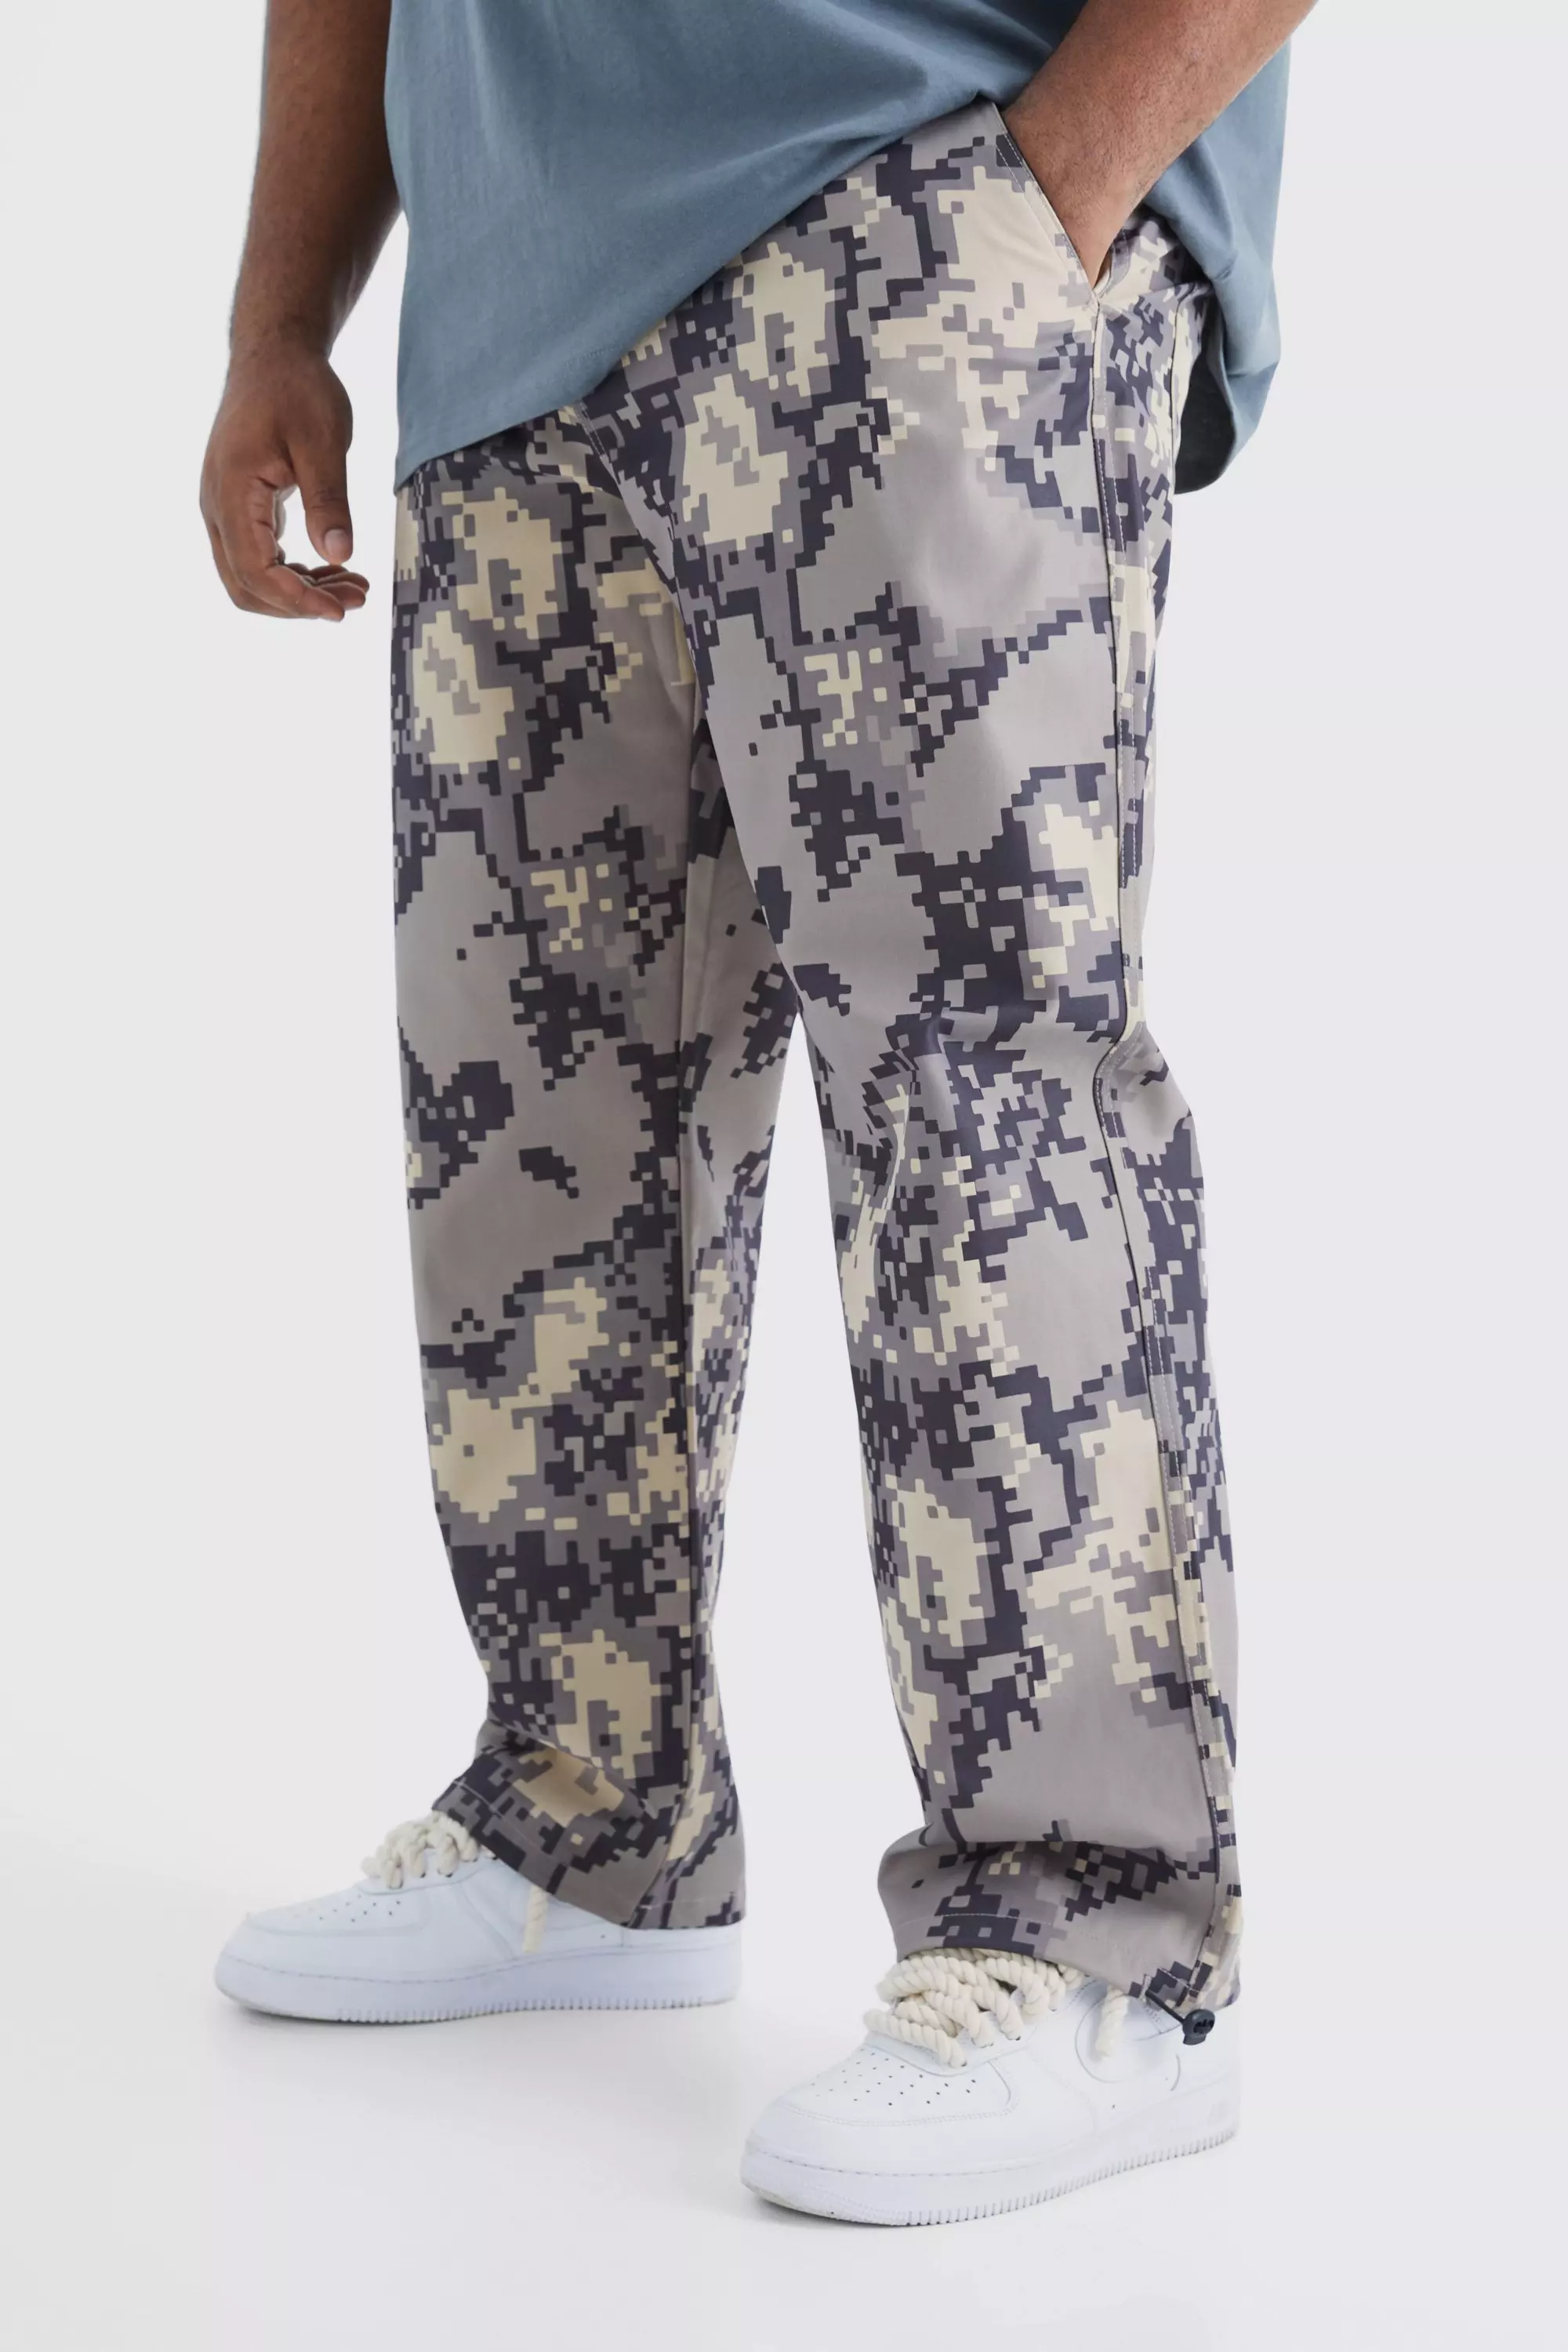 Plus Relaxed Pixelated Camo Pants Stone